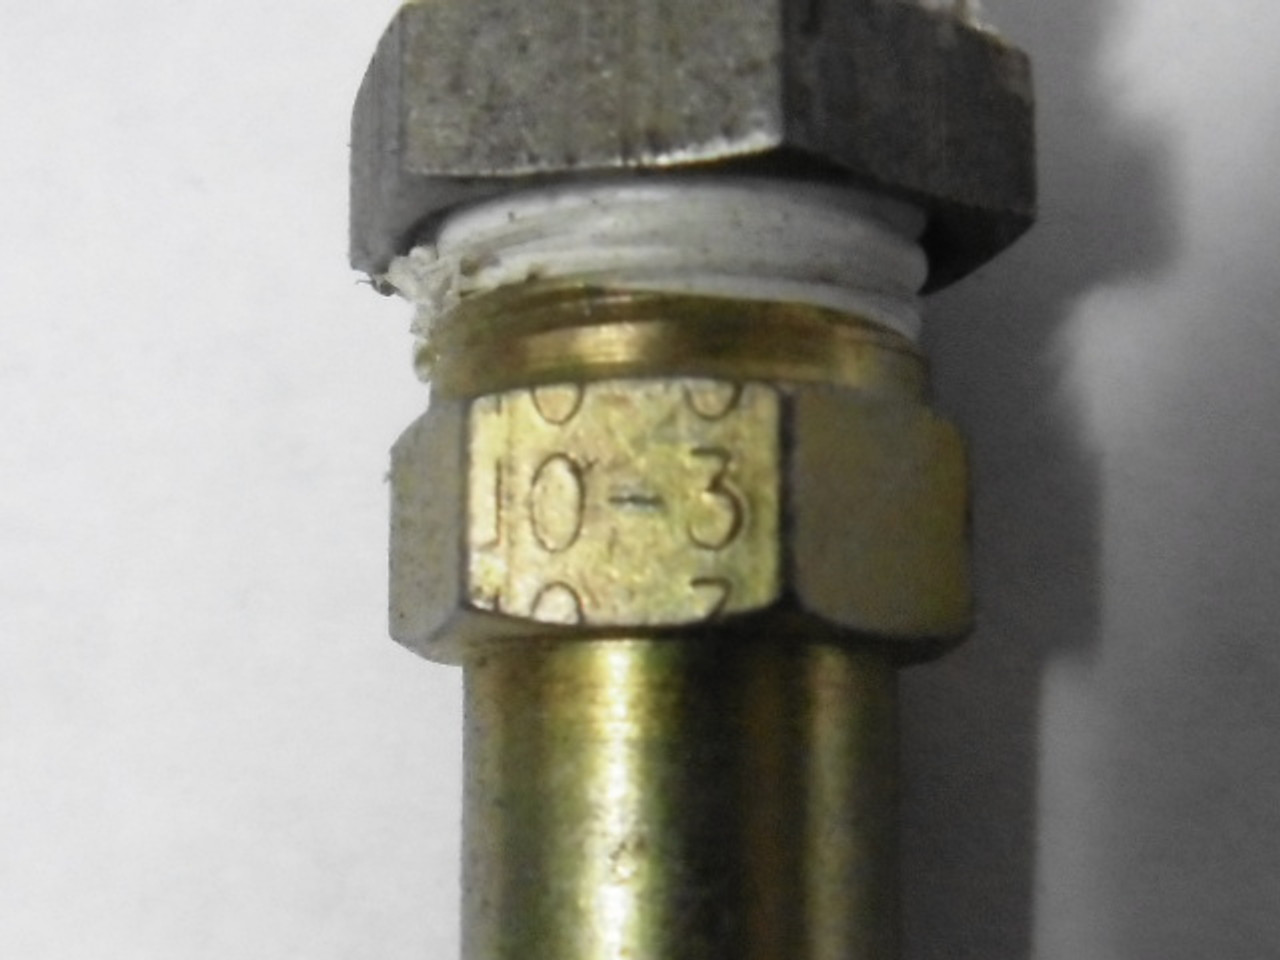 Foster 10-3 Coupling 1/4" Quick Disconnect Male Plug USED